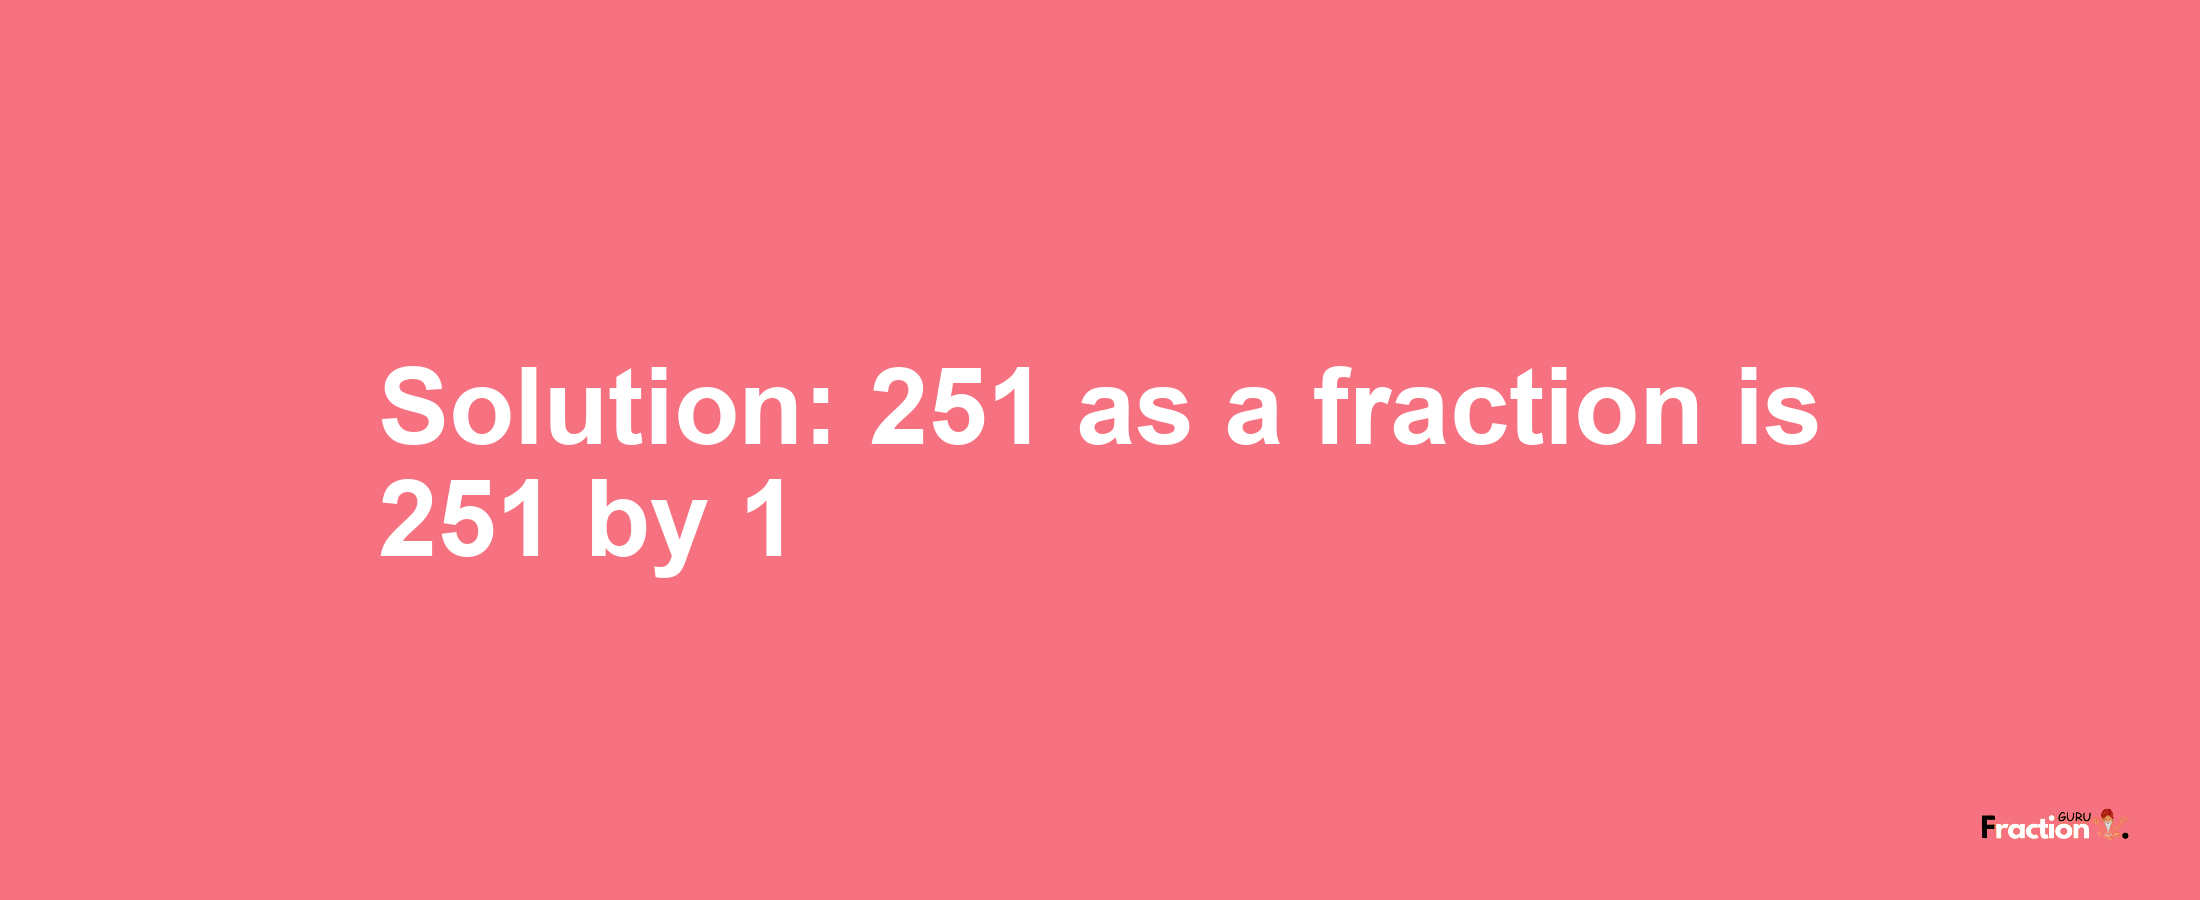 Solution:251 as a fraction is 251/1